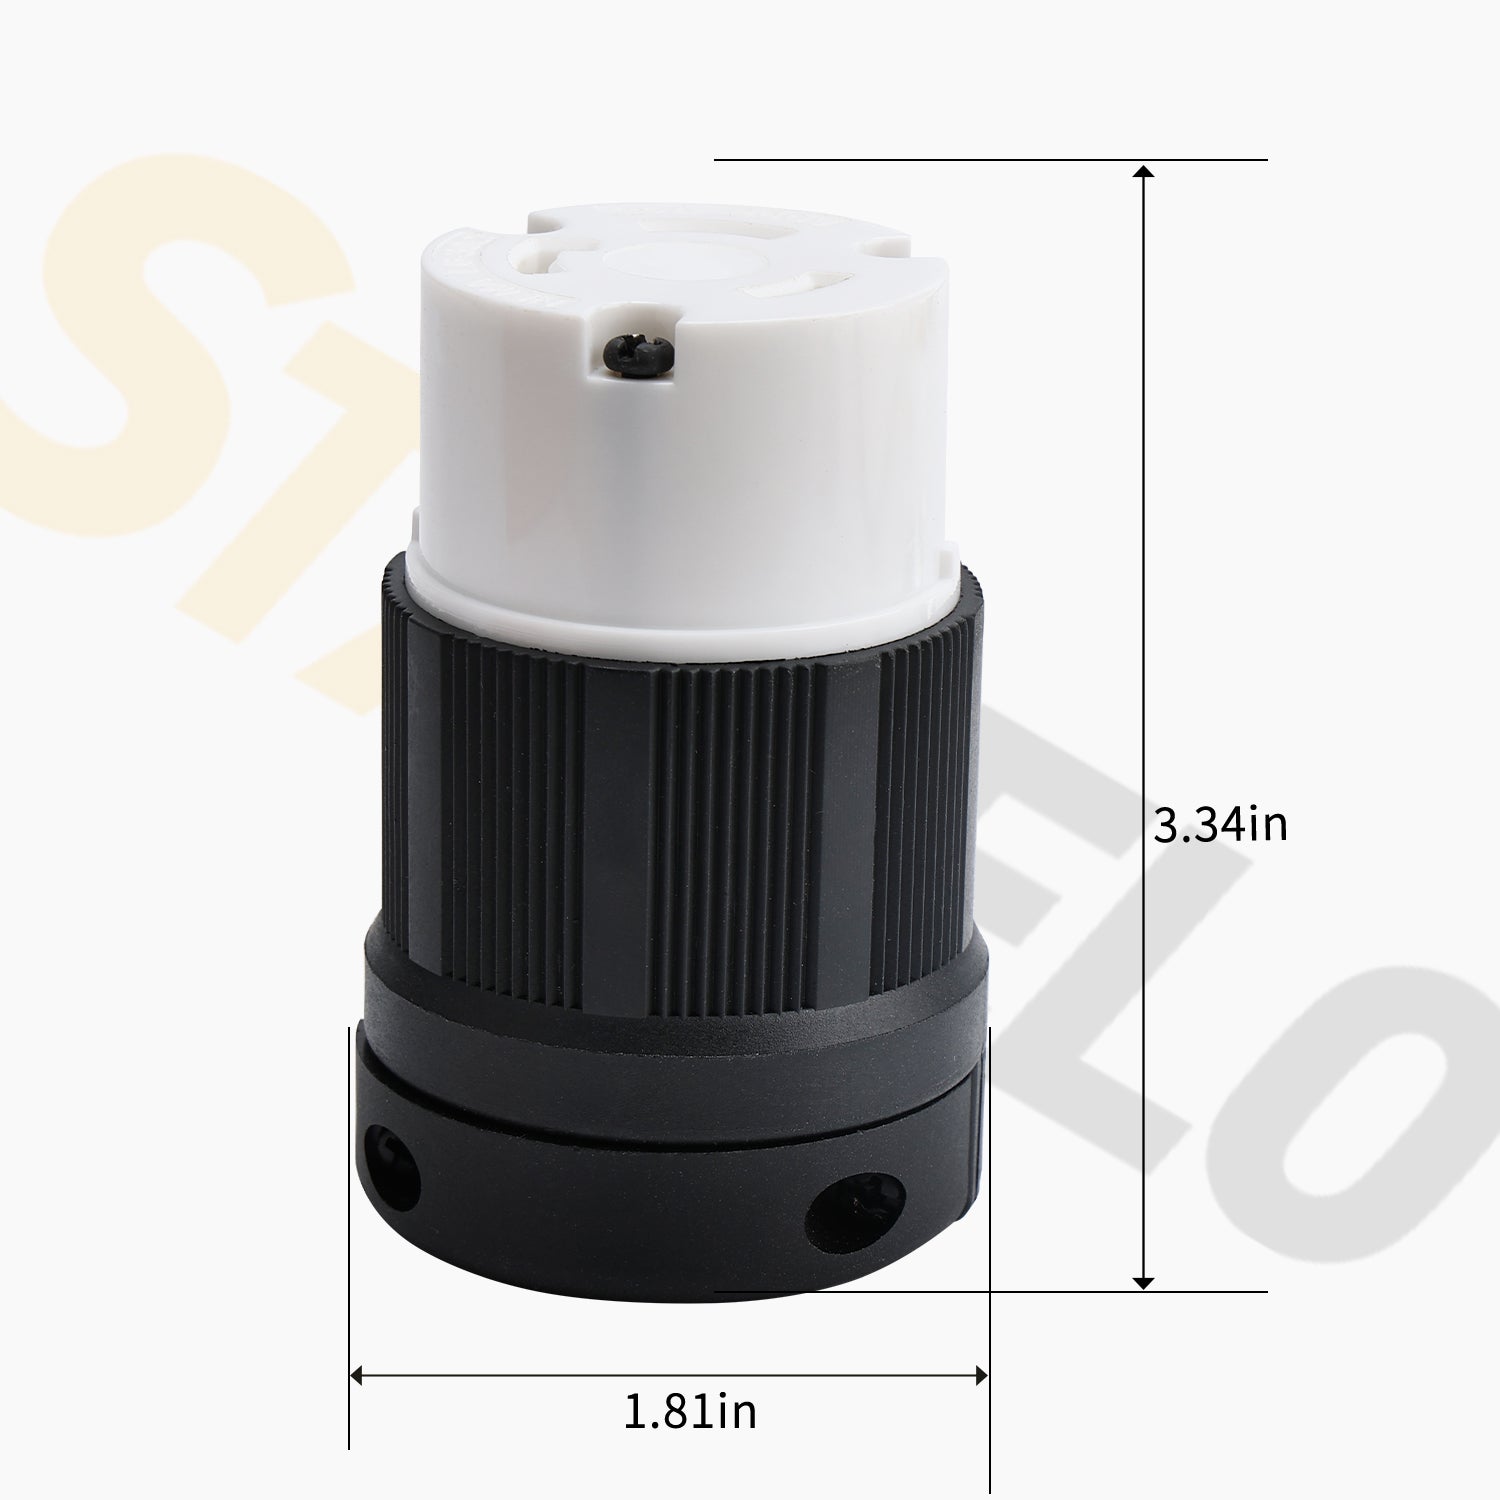 STARELO Locking Connector for Generator NEMA L6-30C Extension Cord End Female Connector 30A 250V 2 Pole 3 Wire Grounding Electrical Replacement Connector Industrial Grade UL Listed(NEMA L6-30C)